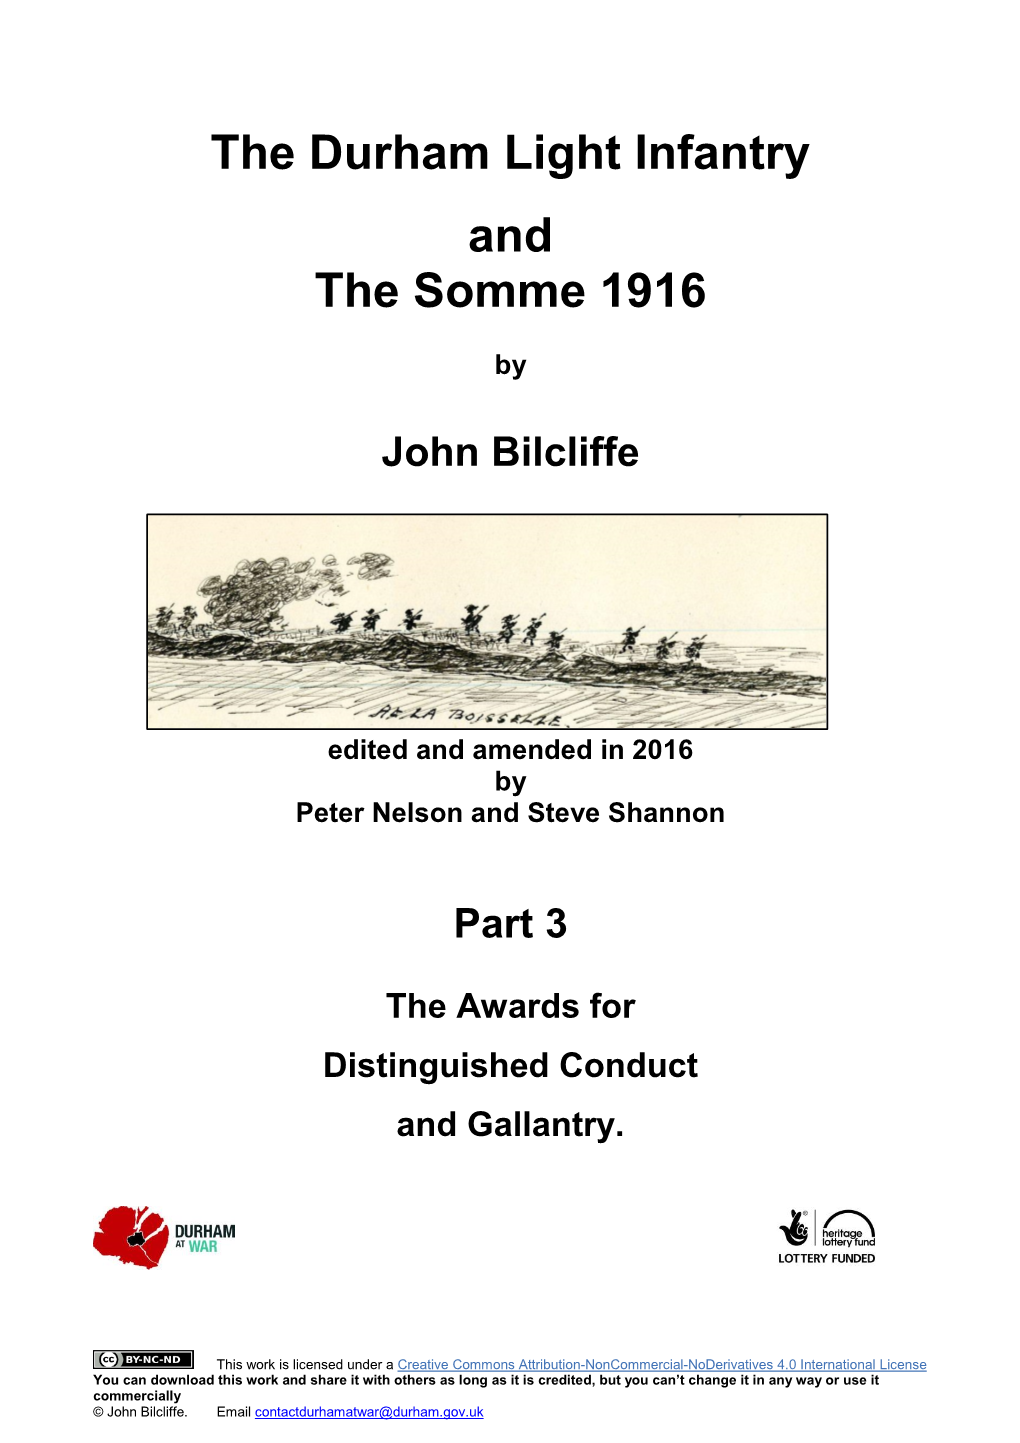 The Durham Light Infantry and the Somme 1916